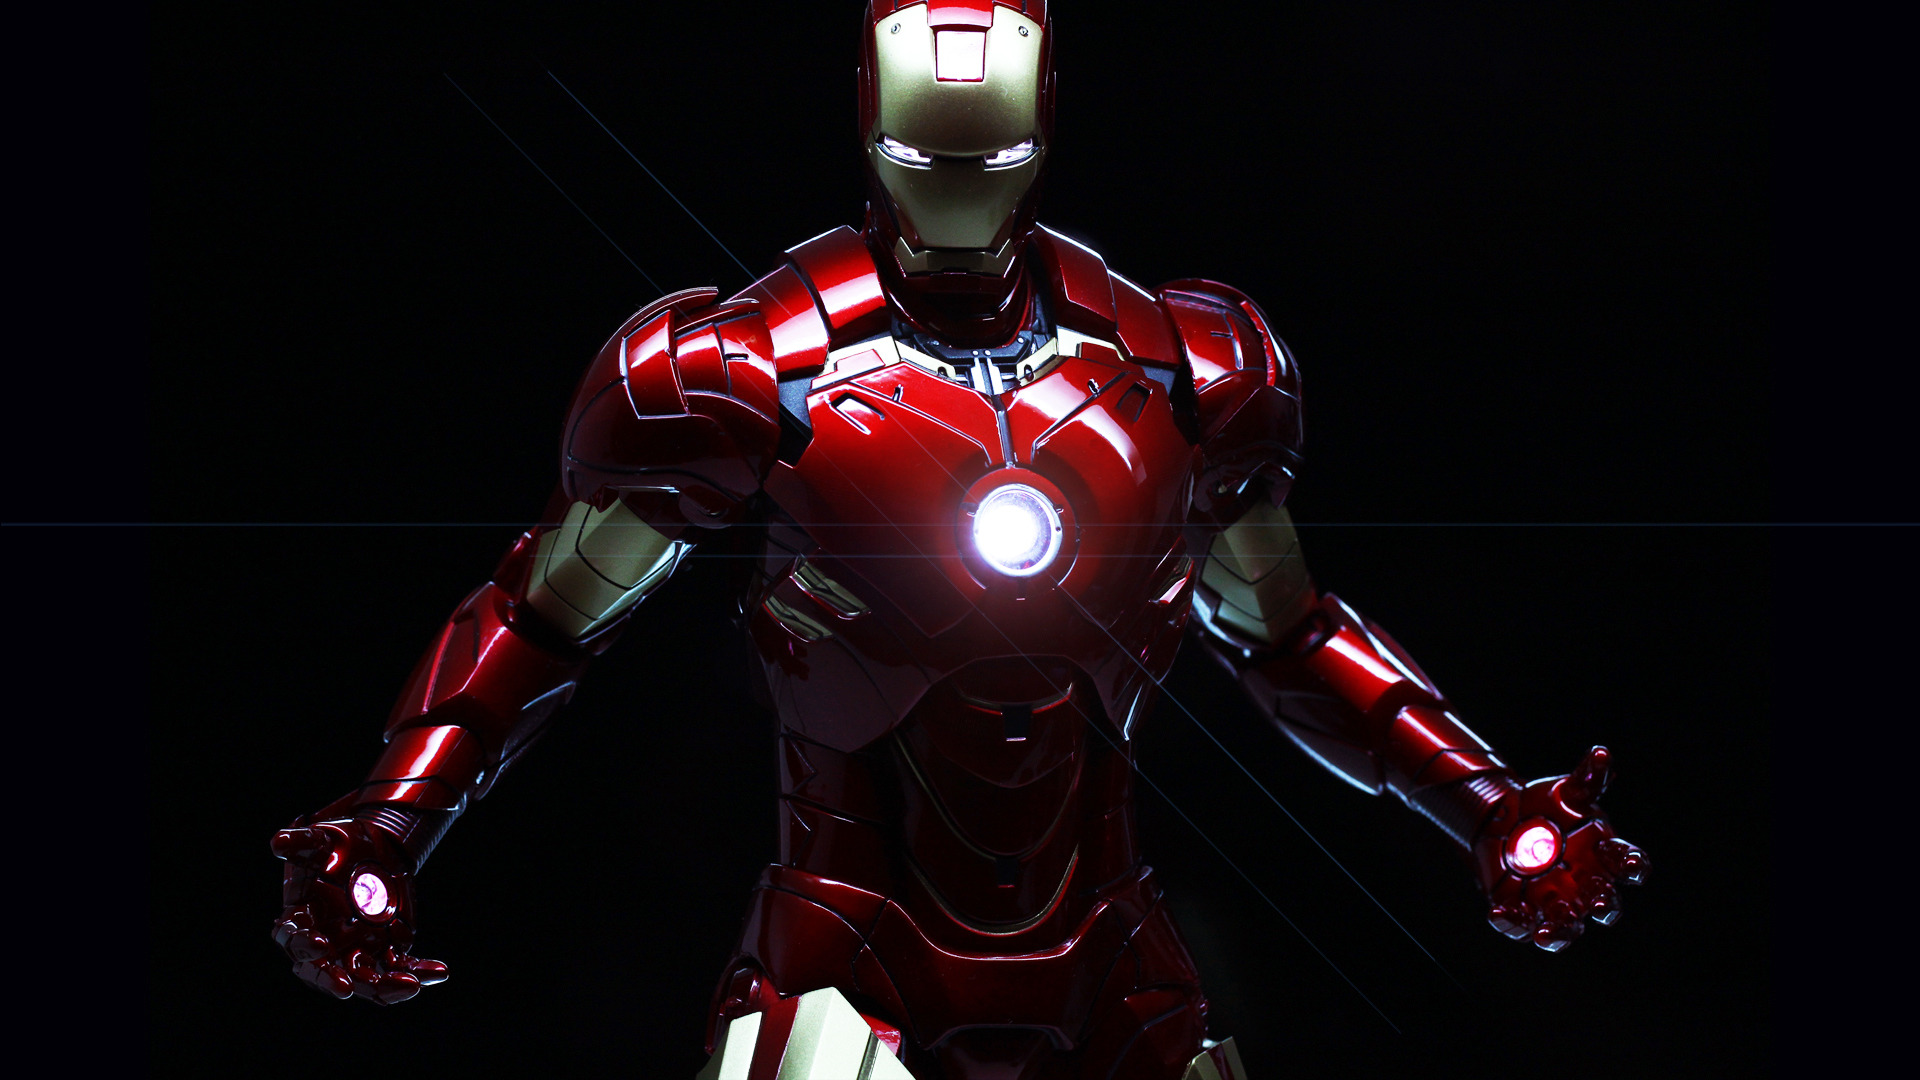 Wallpaper Details File Name Iron Man HD Uploaded By